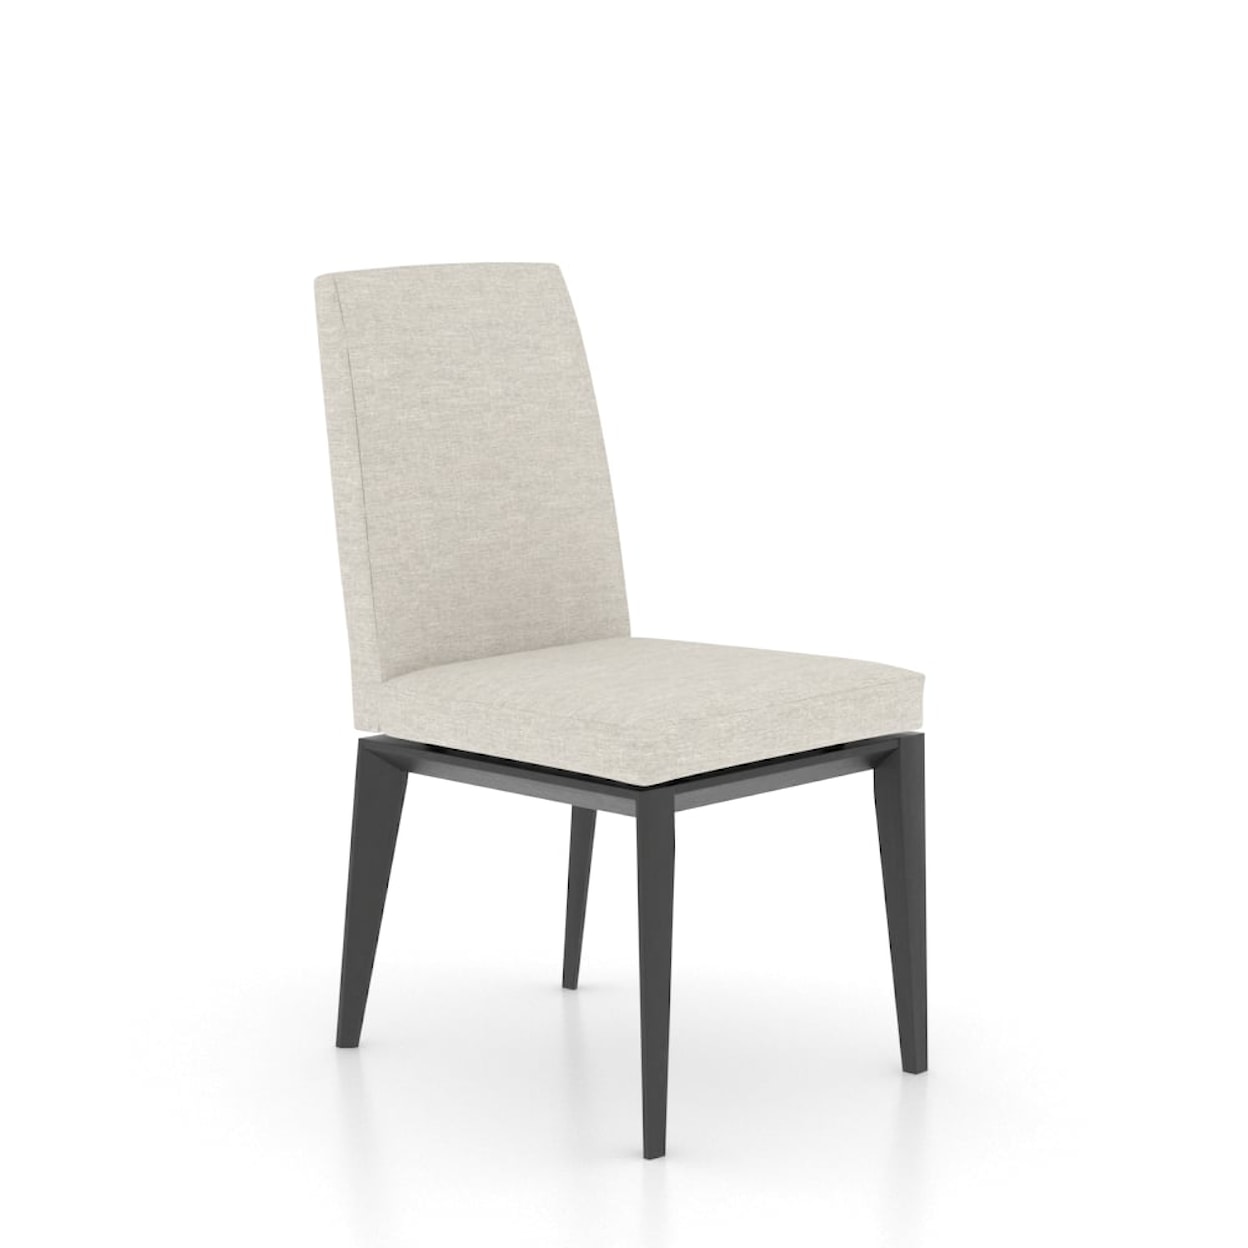 Canadel Downtown Customizable Upholstered Chair